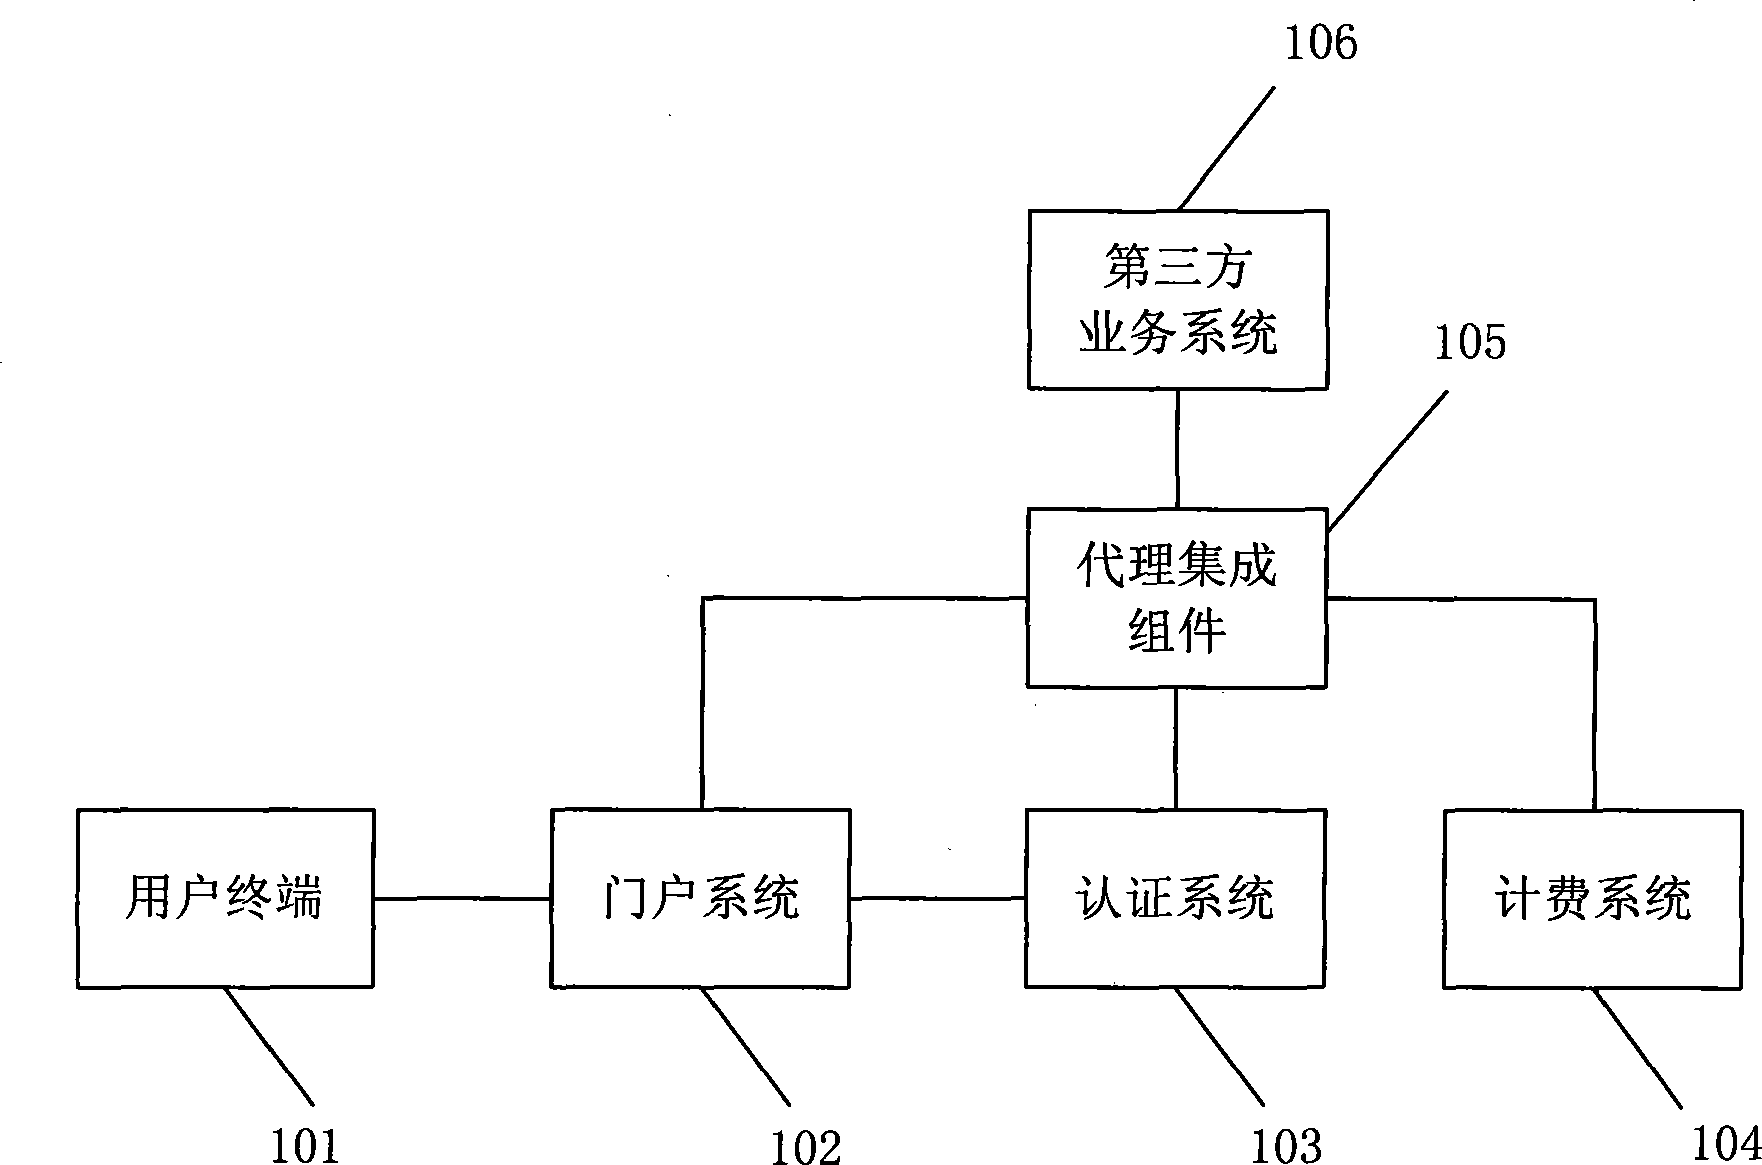 Method and system for implementing authentication